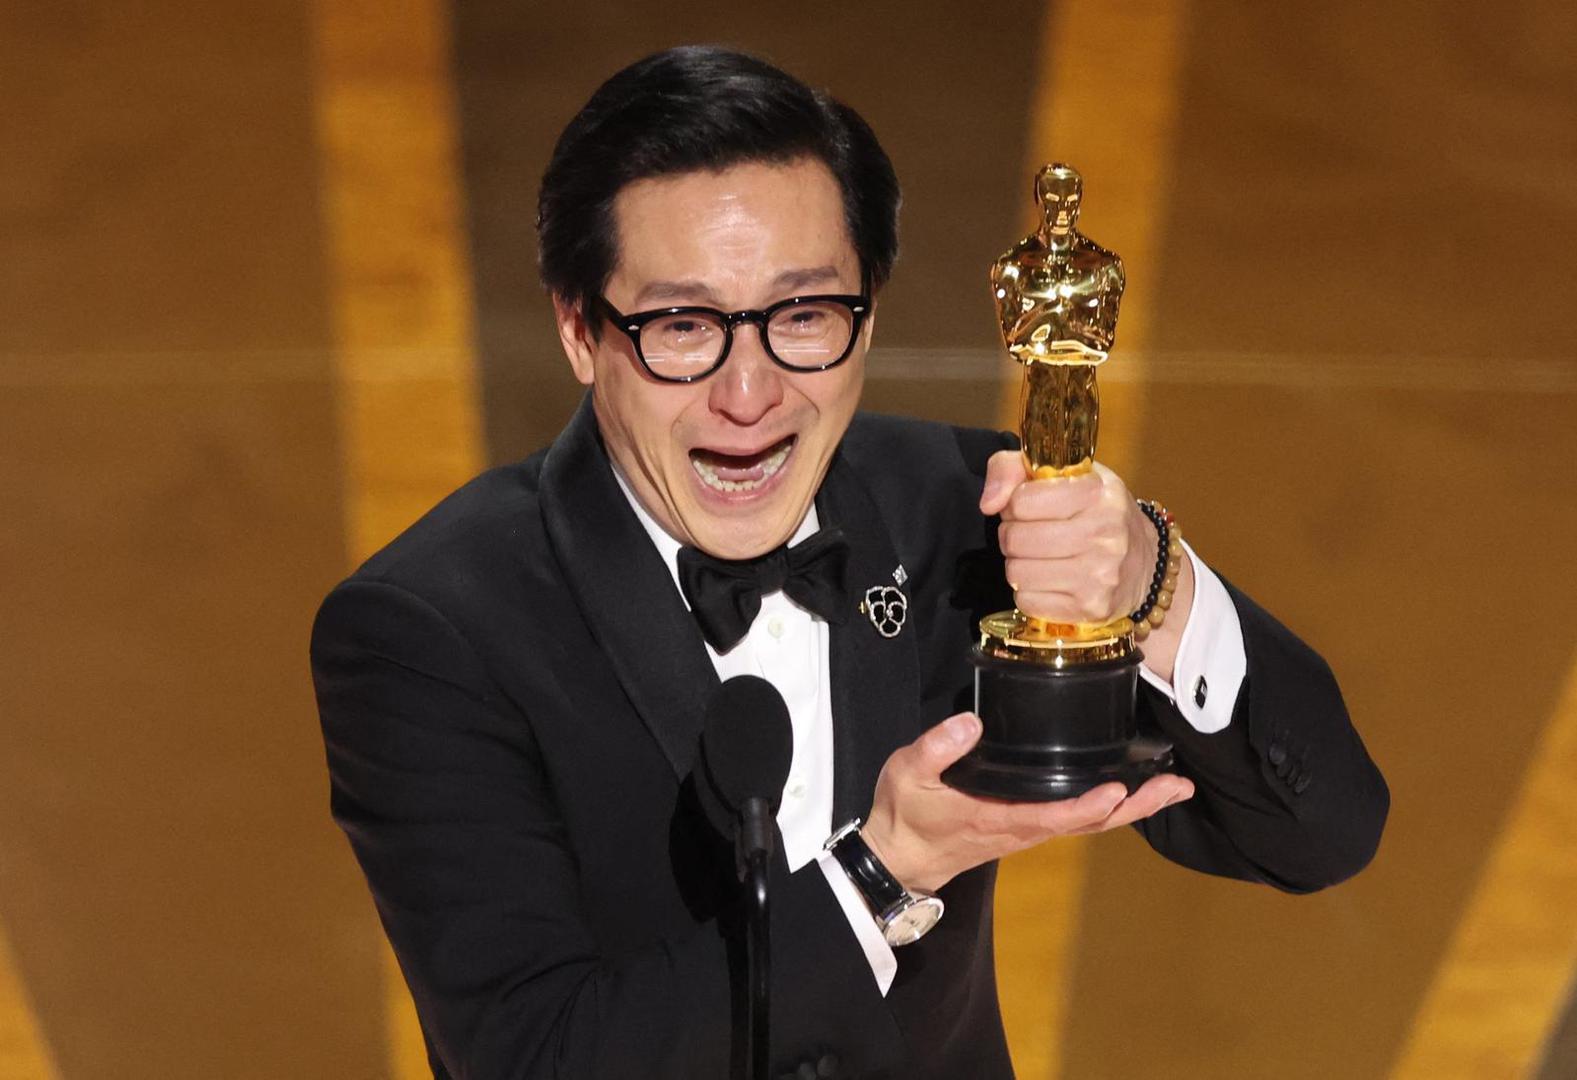 Ke Huy Quan wins the Oscar for Best Supporting Actor for "Everything Everywhere All at Once" during the Oscars show at the 95th Academy Awards in Hollywood, Los Angeles, California, U.S., March 12, 2023. REUTERS/Carlos Barria Photo: CARLOS BARRIA/REUTERS